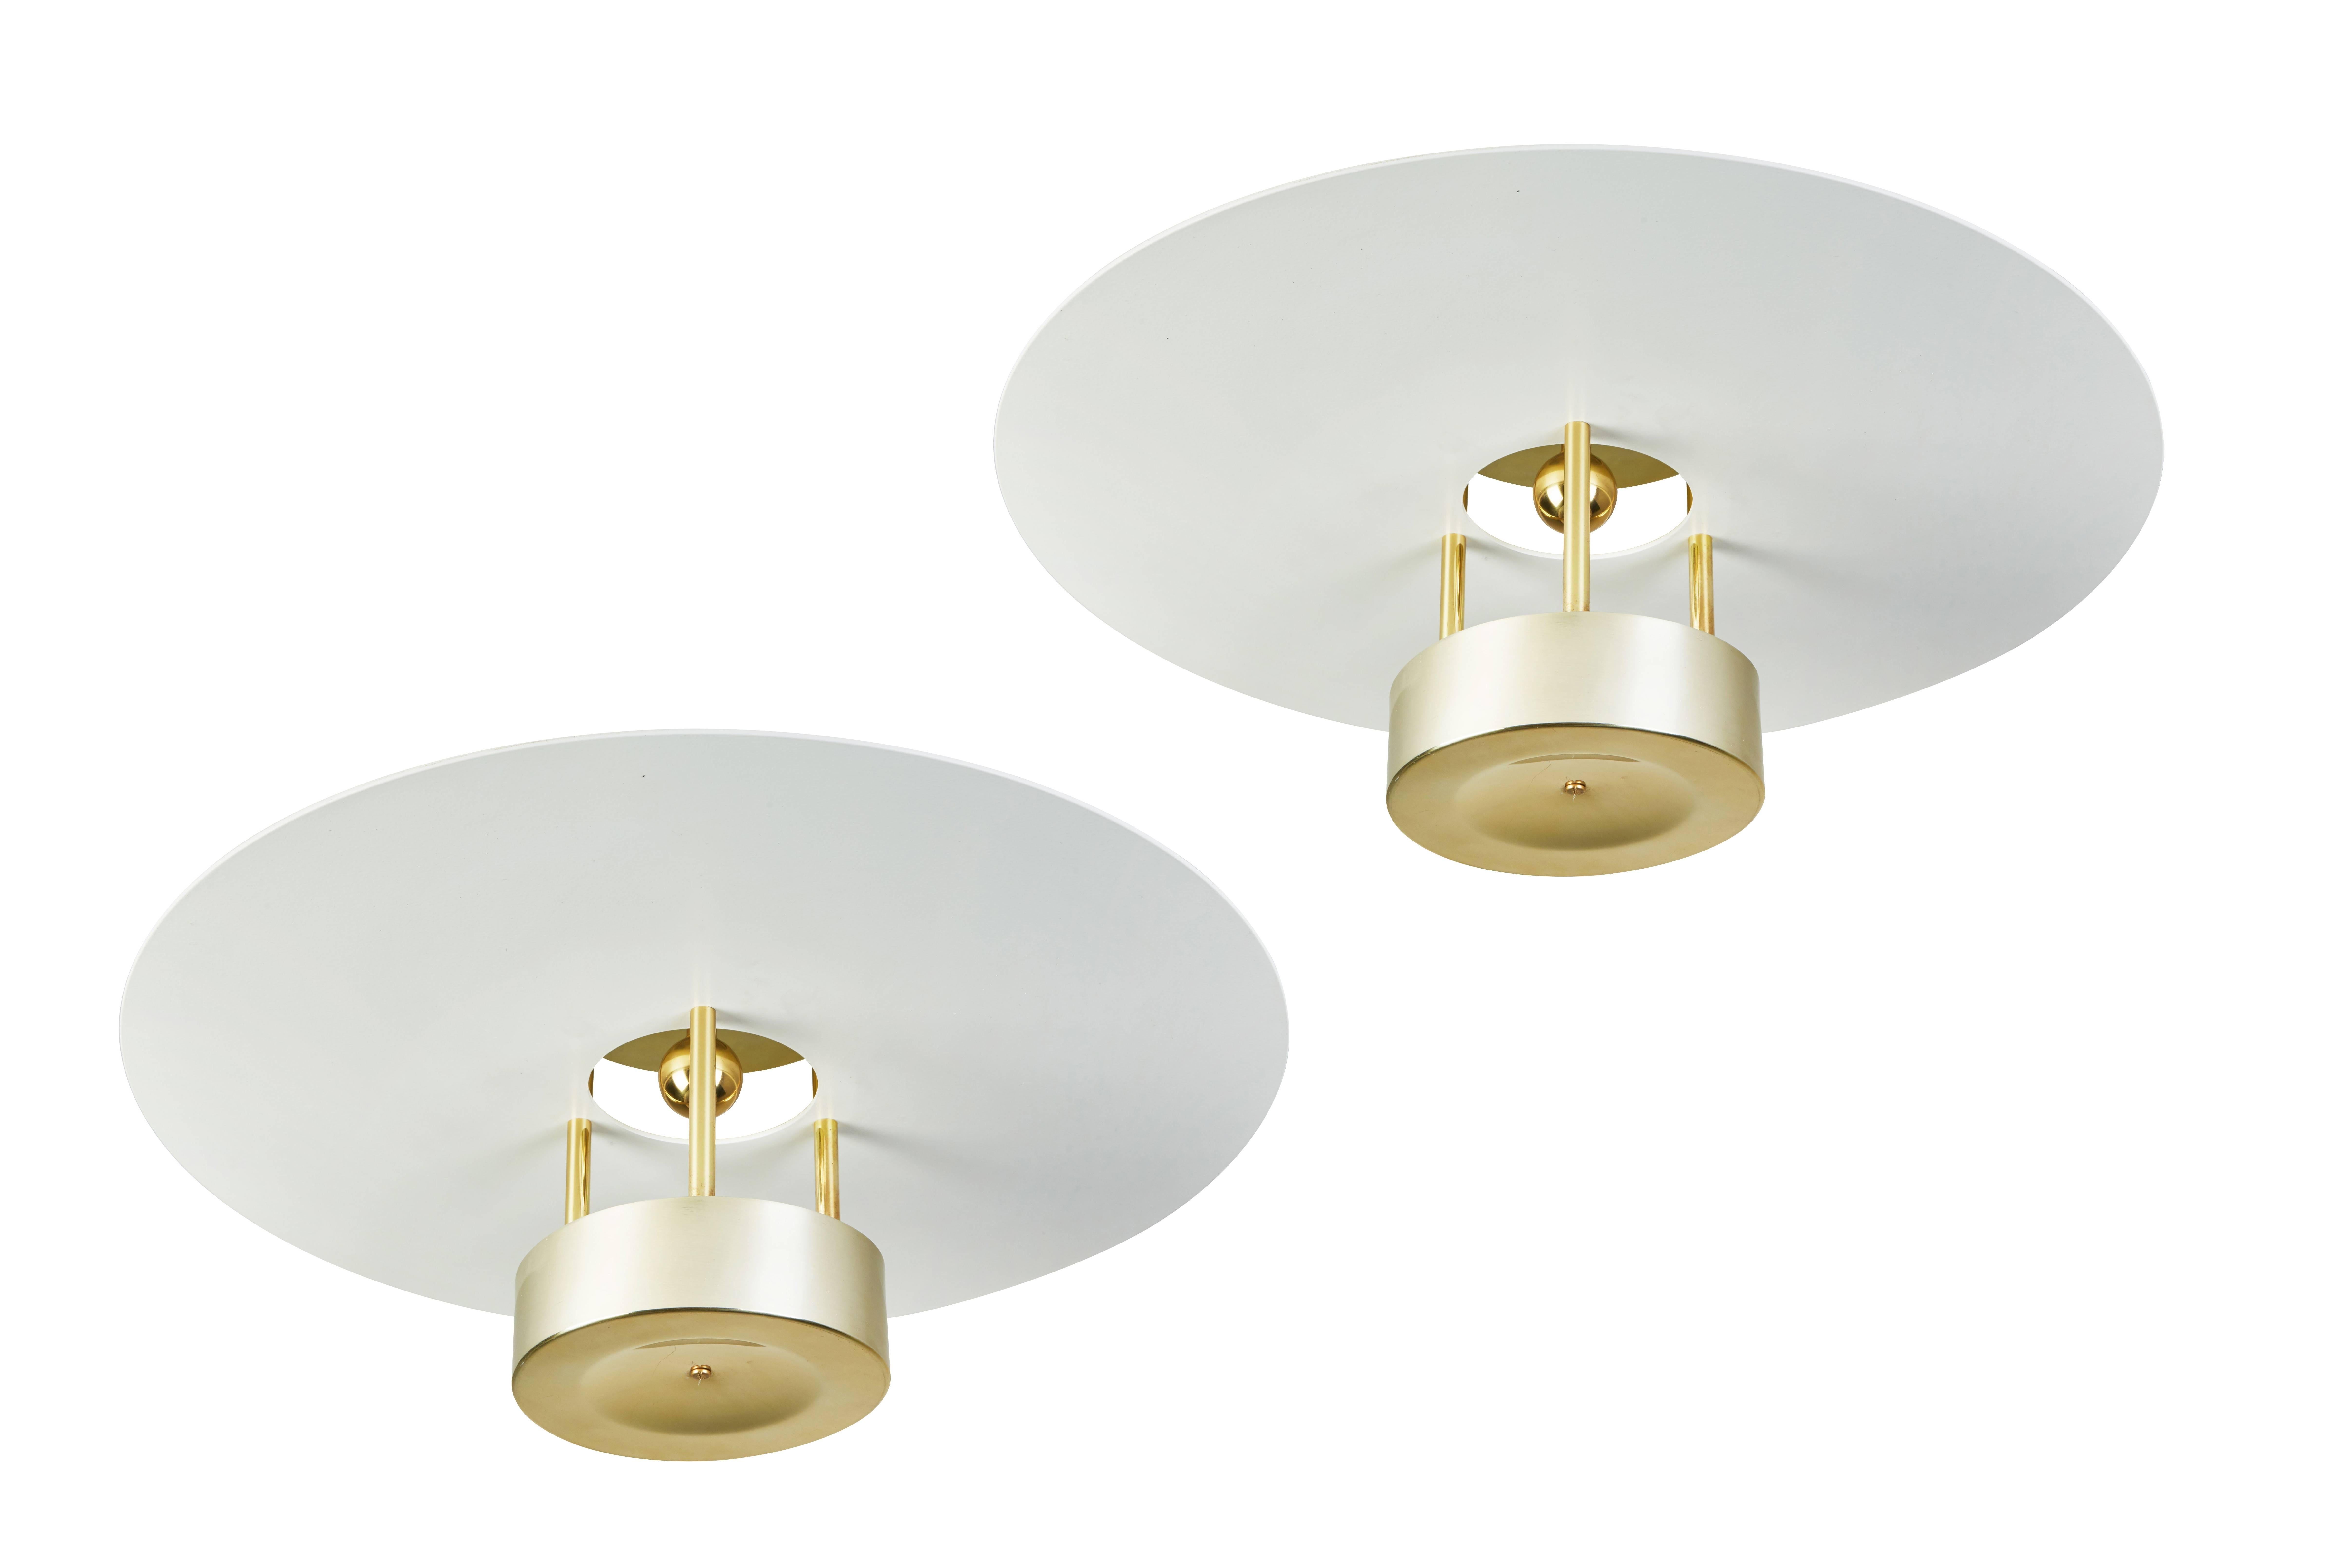 Pair of flush mount ceiling lights by Hans-Agne Jakobsson. Retains original label. Wired for US junction boxes.